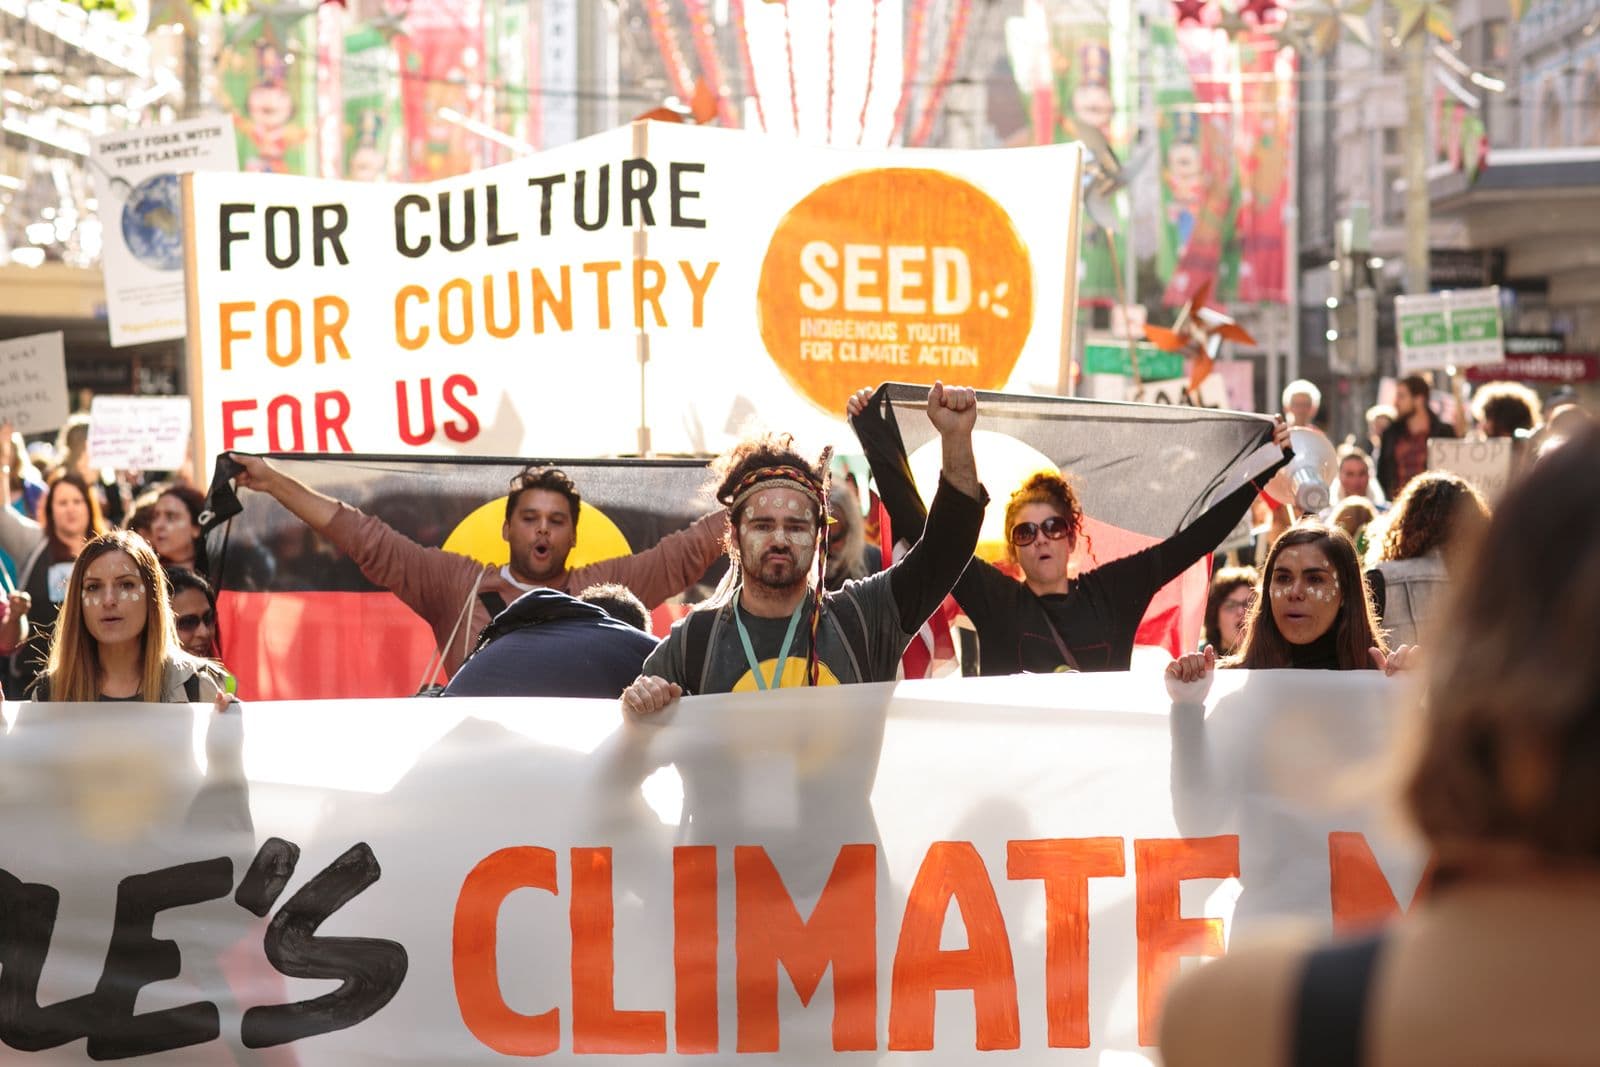 Group of protestors in climate march